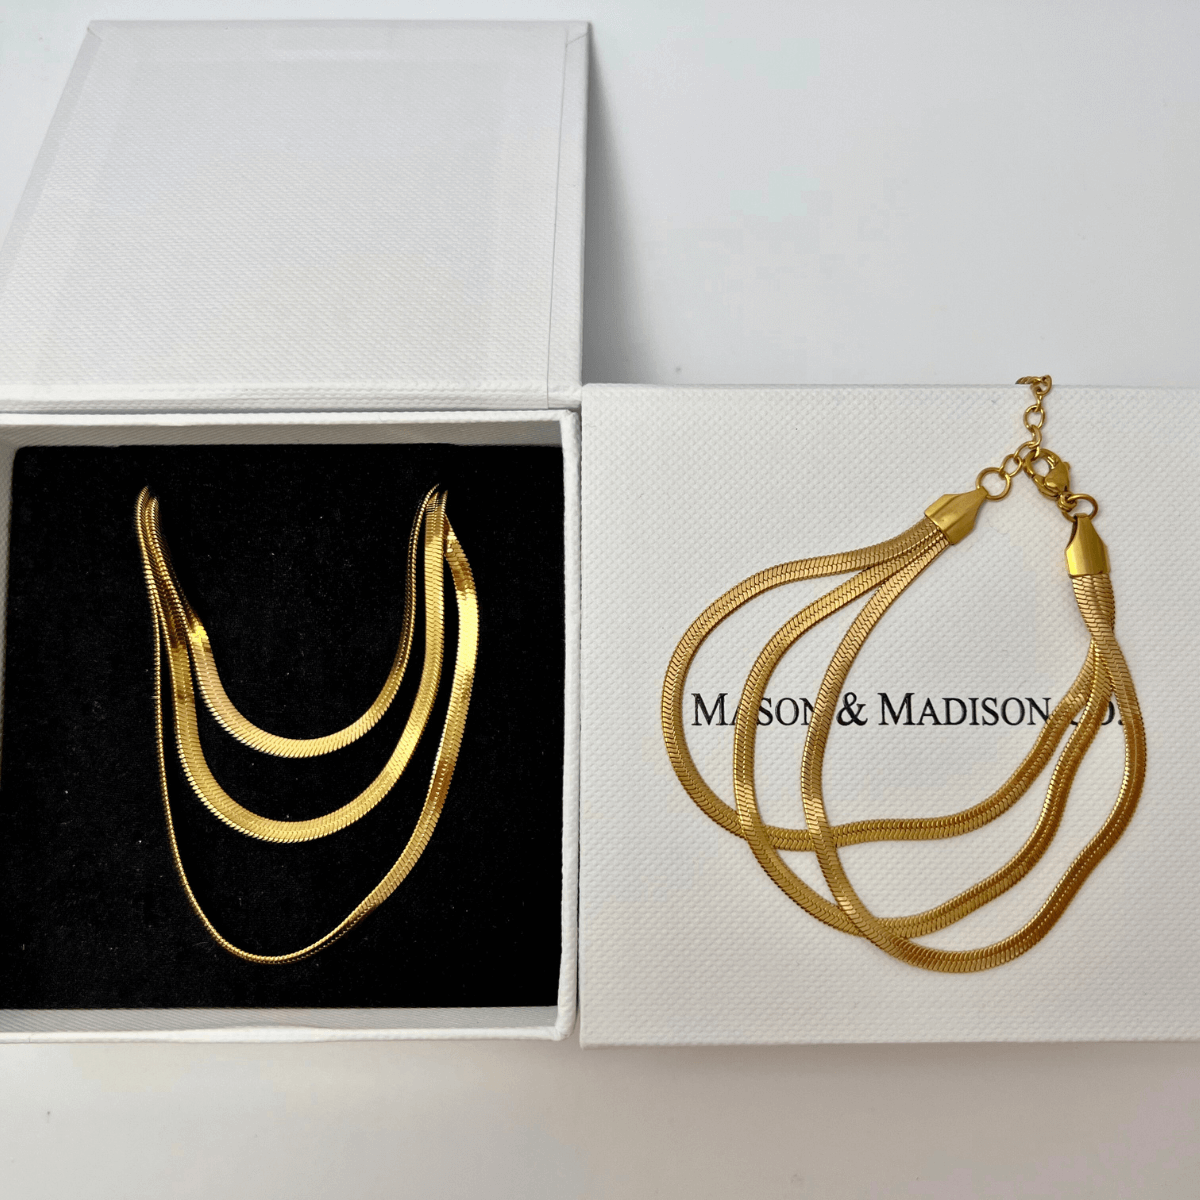 1# BEST Gold Layered Layering Chain Jewelry Bundle Set Gift for Women | #1 Best Most Top Trendy Trending Aesthetic Yellow Gold Layered Layering Chain Necklace, Bracelet Jewelry Bundle Set Gift for Women, Mother, Wife, Ladies | Mason & Madison Co.